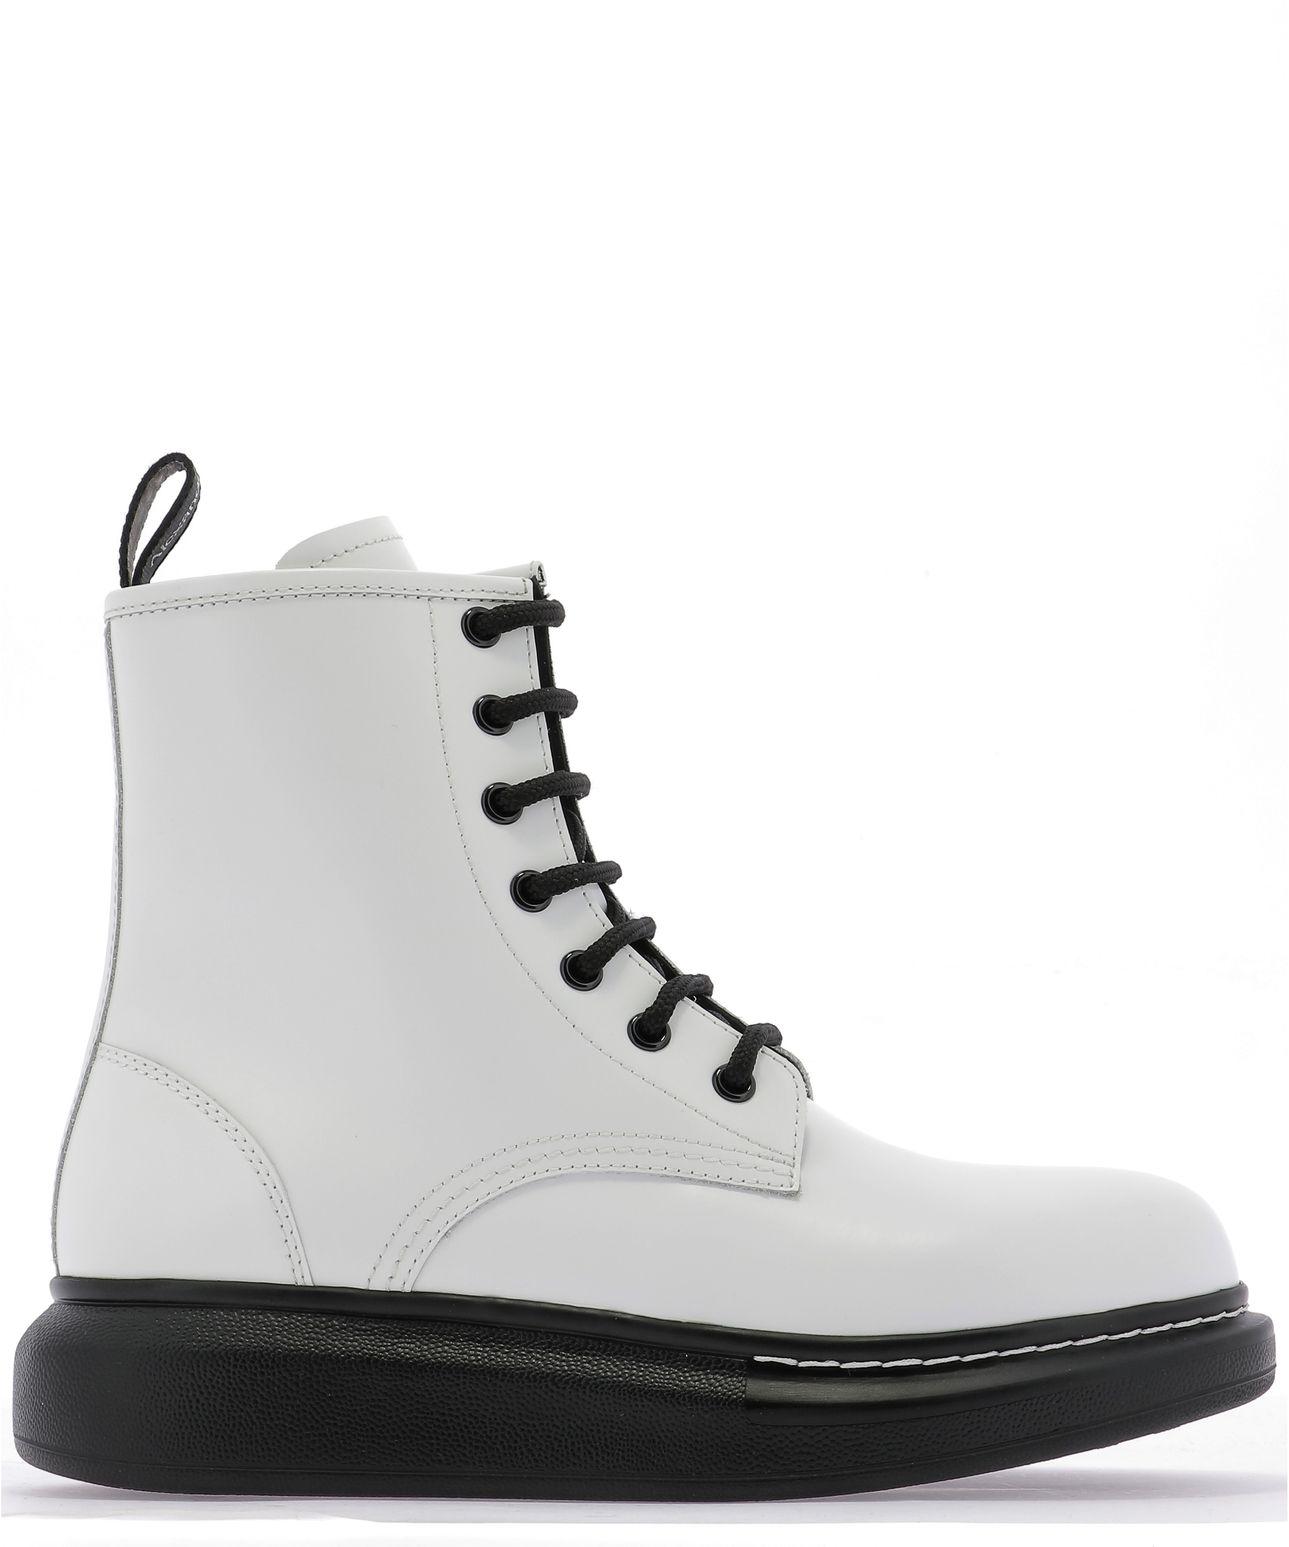 Alexander McQueen Leather Ankle Boots in White - Lyst